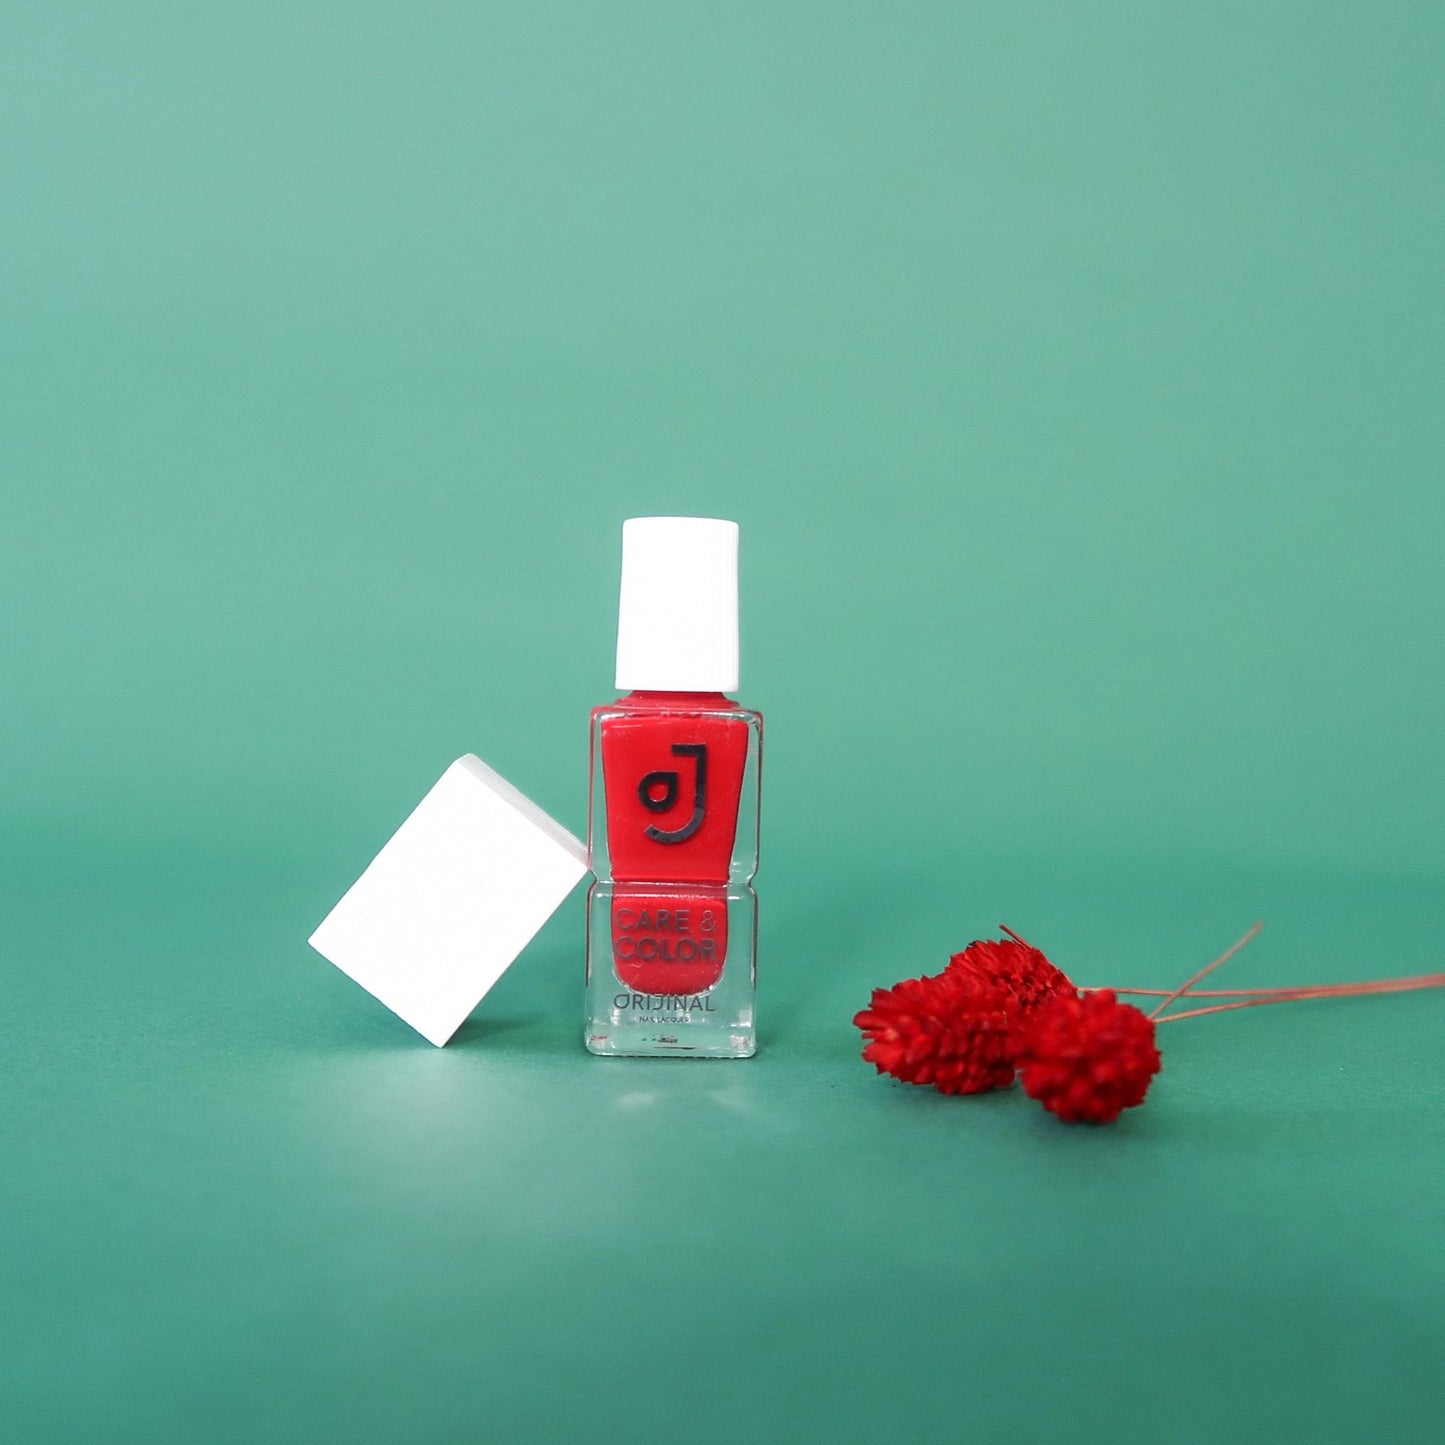 Vernis consigné rouge